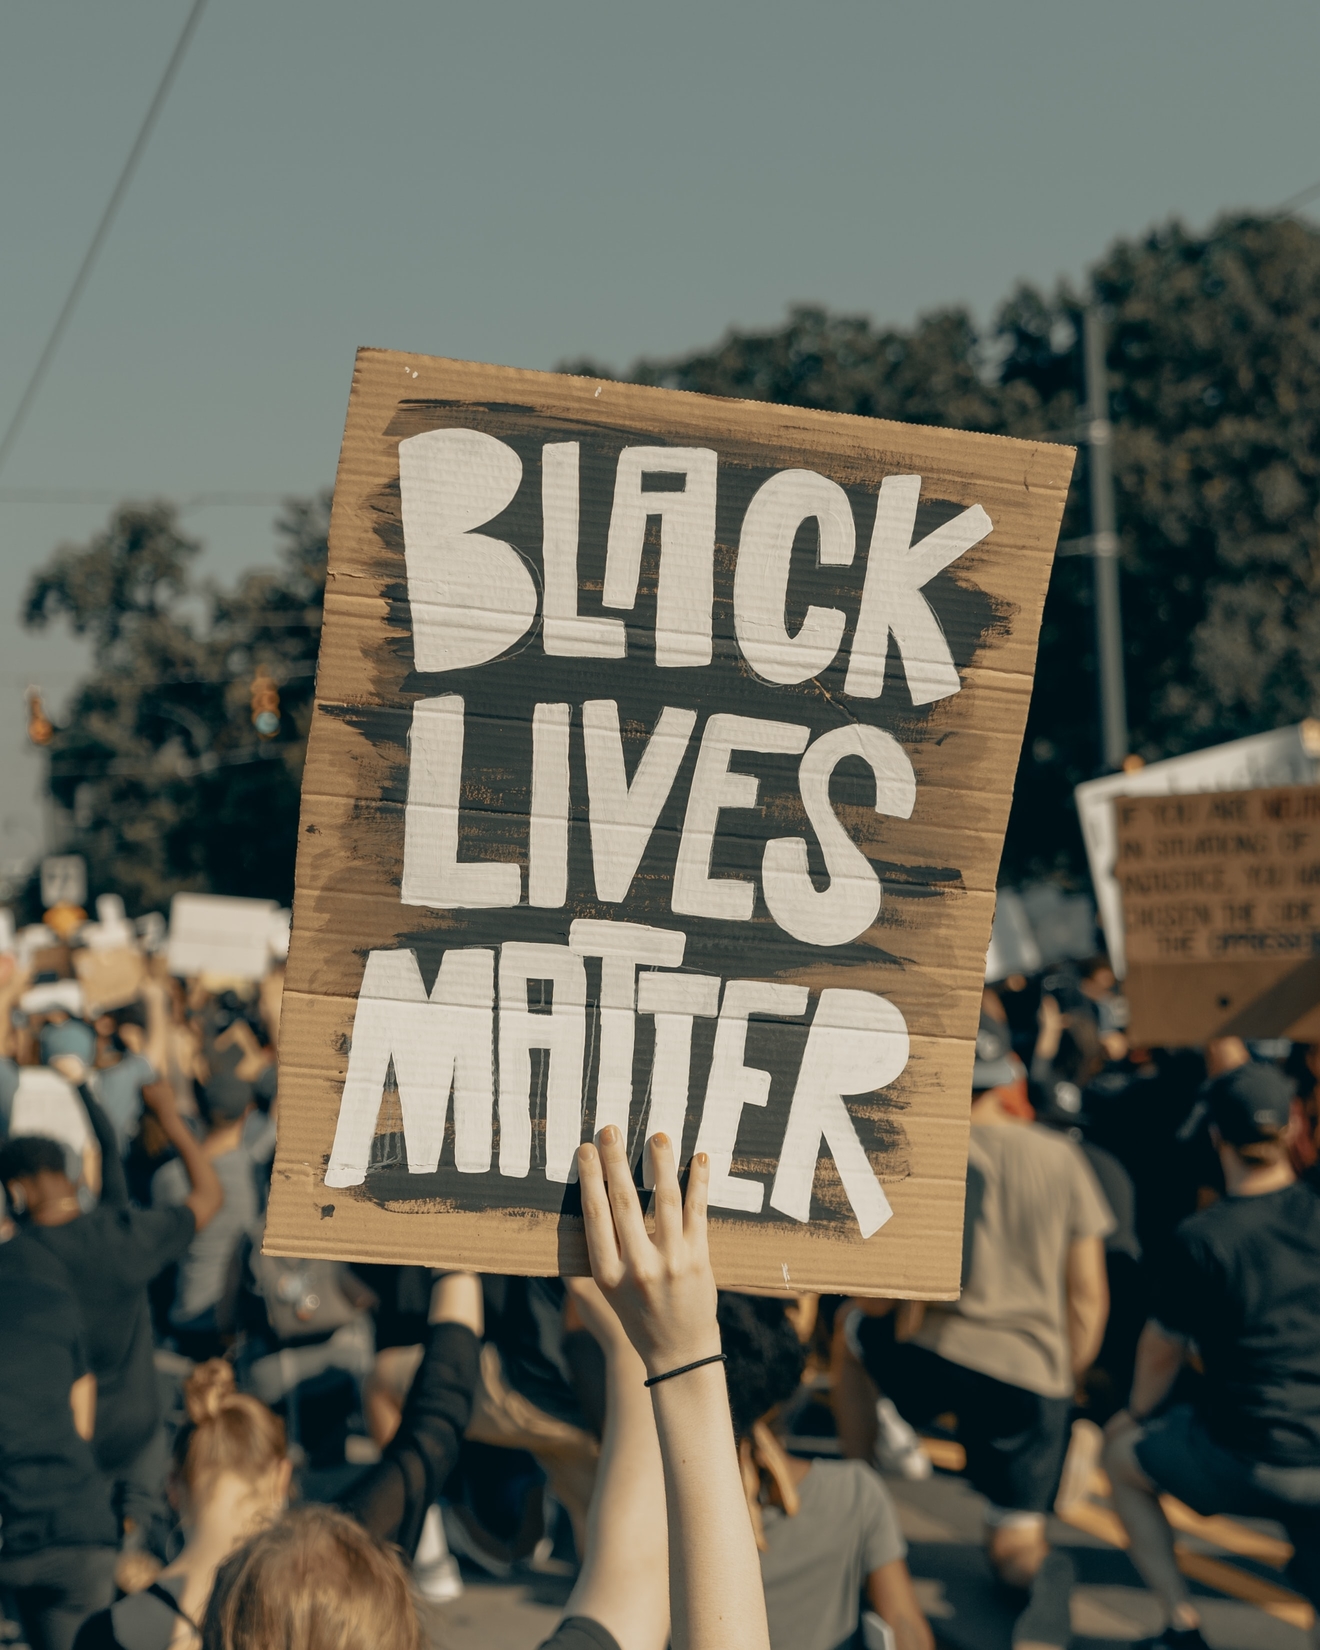 Black Lives Matter Protest in Charlotte, NC | Photo by Clay Banks